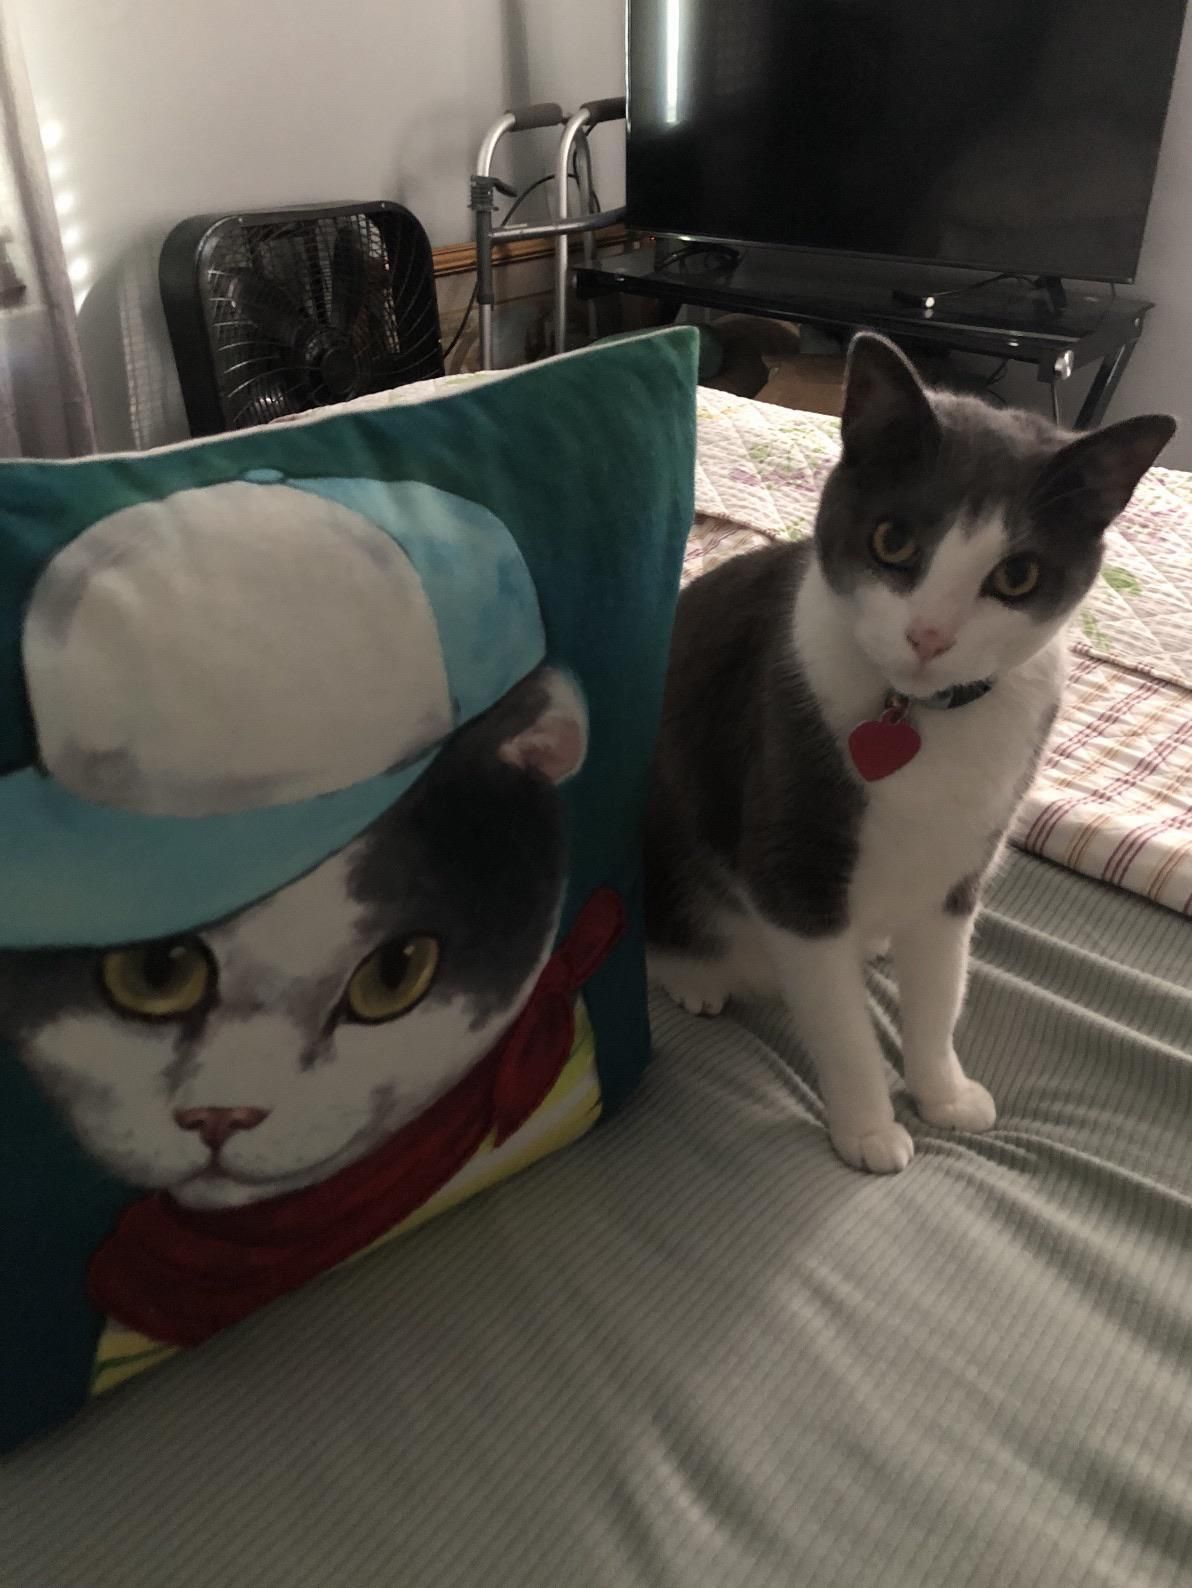 My Mima saw a pillow at the grocery store that looks just like her cat Tuna- she sent me this picture